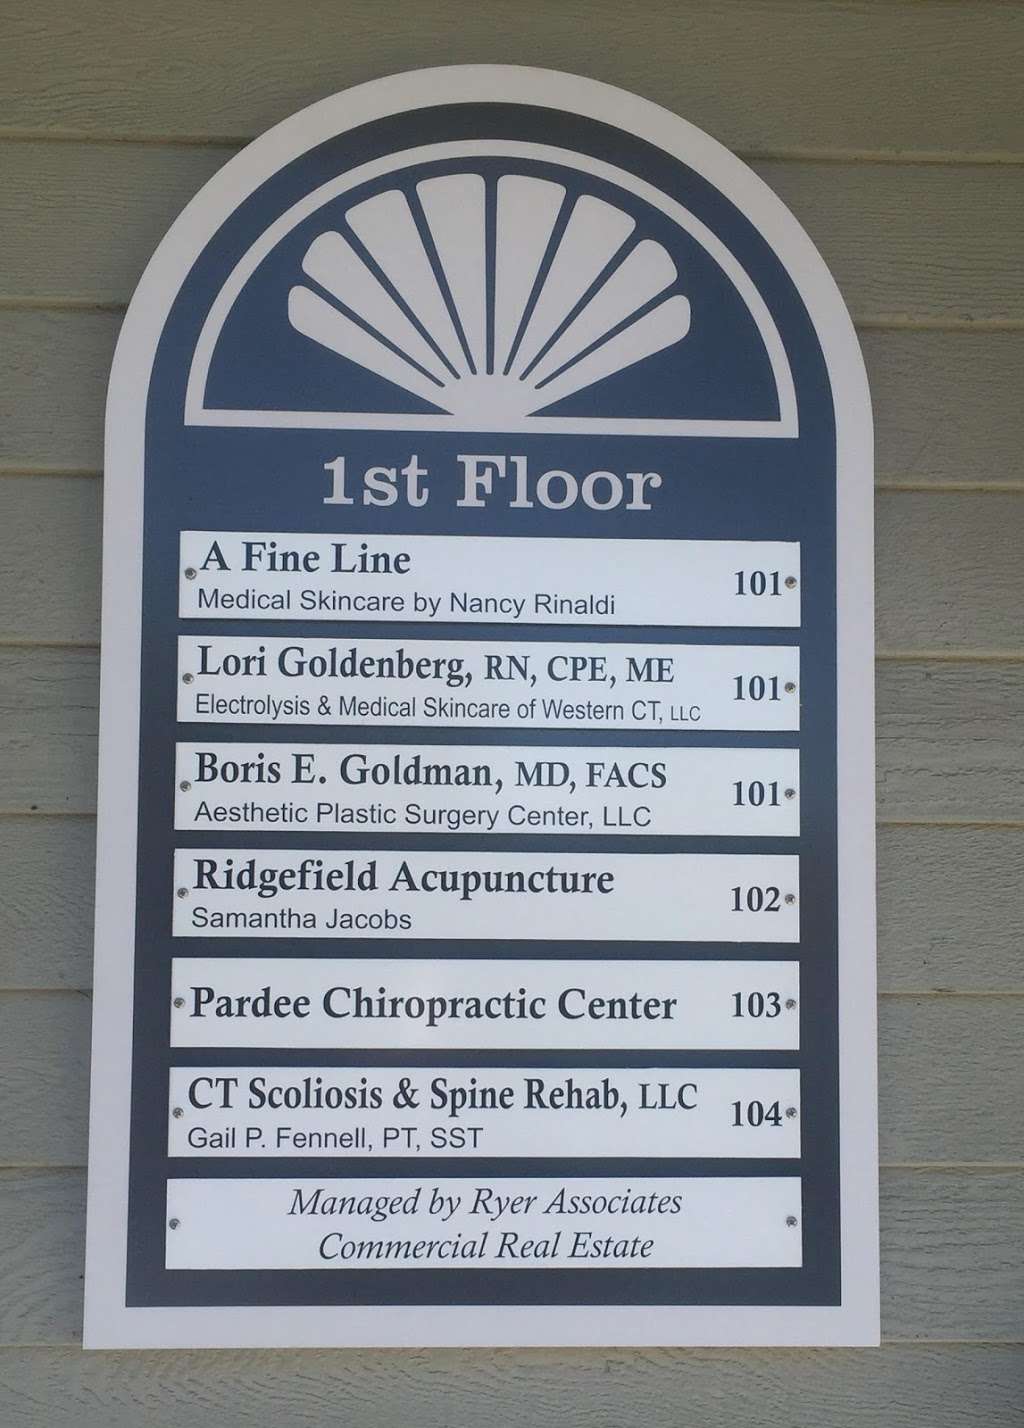 CT Scoliosis and Spine Rehab, LLC | 871 Ethan Allen Hwy #104, Ridgefield, CT 06877 | Phone: (203) 431-0348